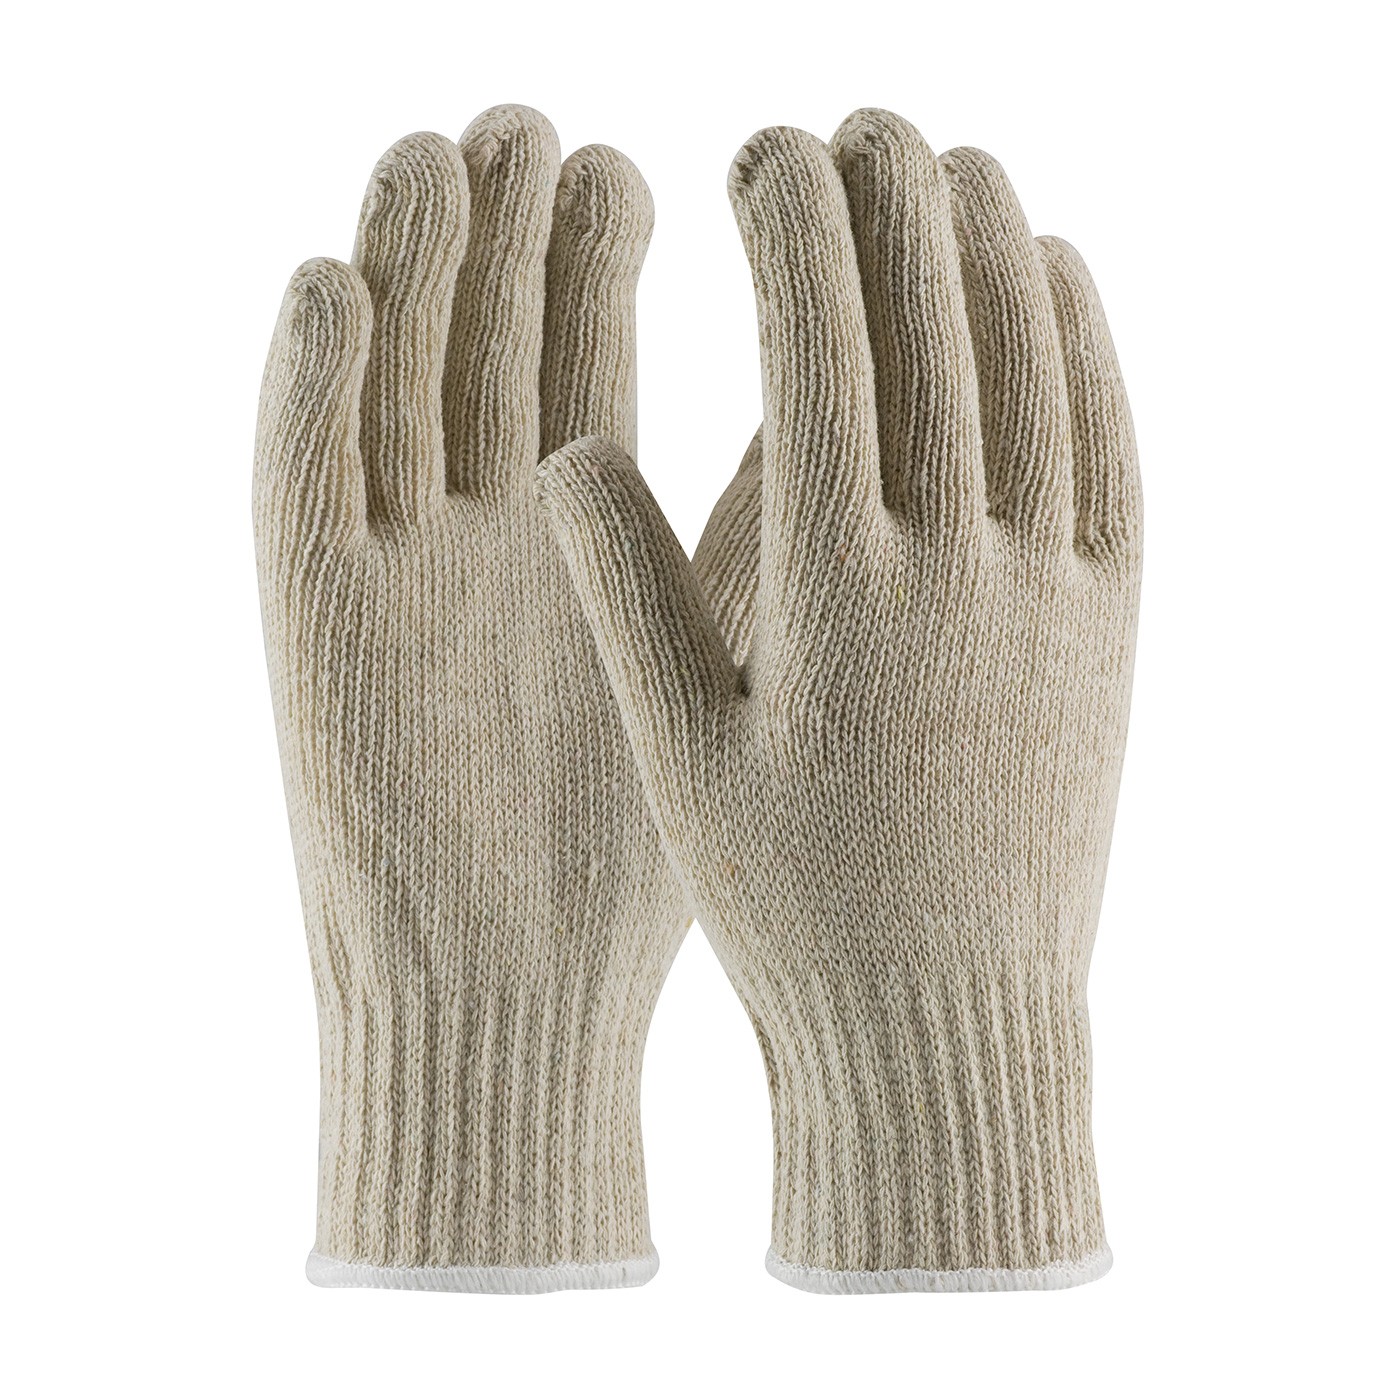 PIP® Heavy Weight Seamless Knit Cotton / Polyester Glove - 7 Gauge  (#712S)